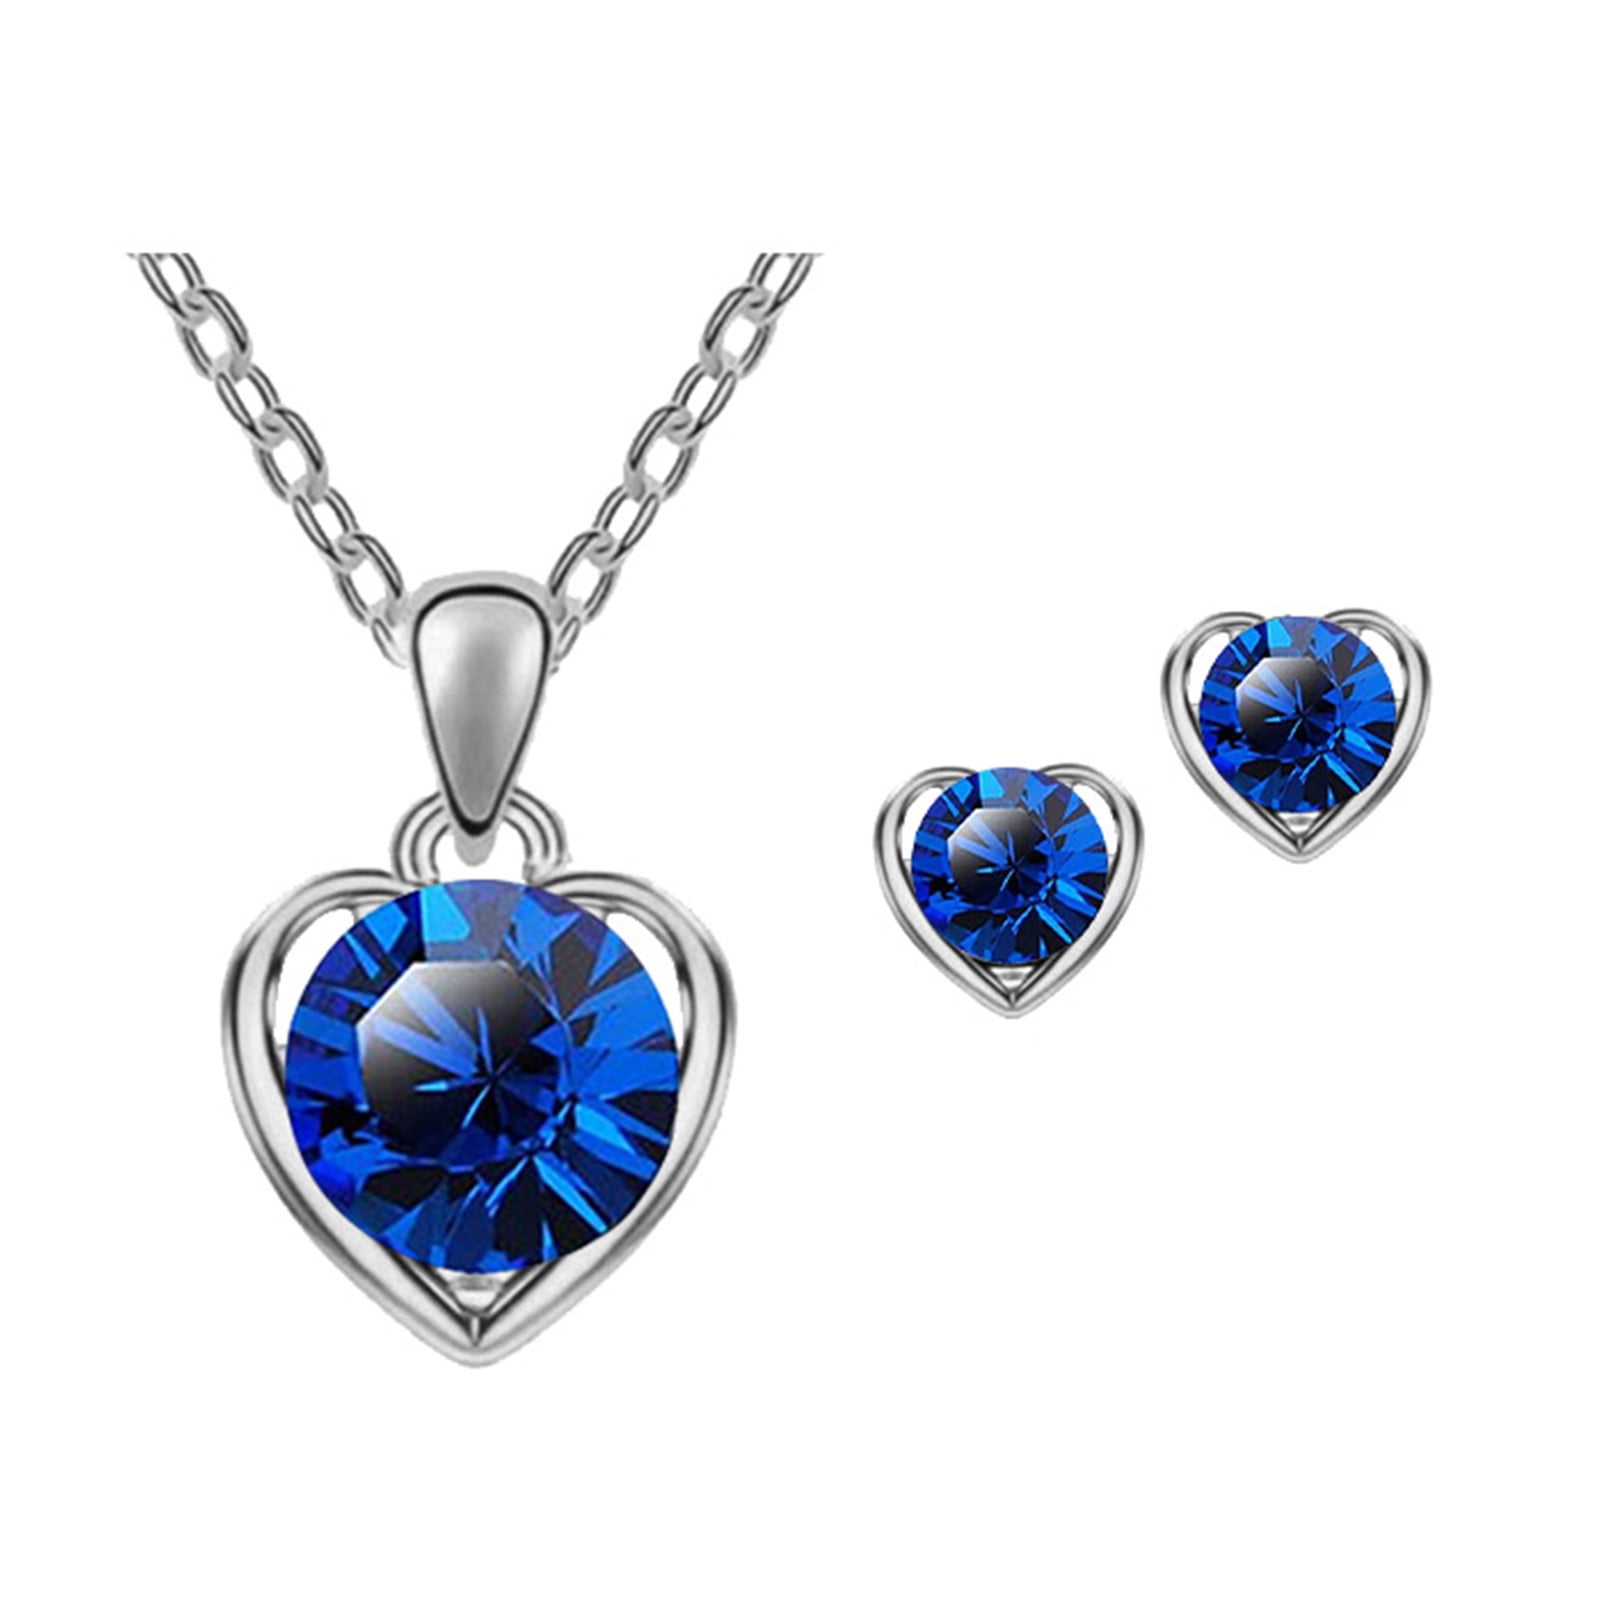 Clearance Jewelry Under $5 VerPetridure Crystal Pendant Necklace ...